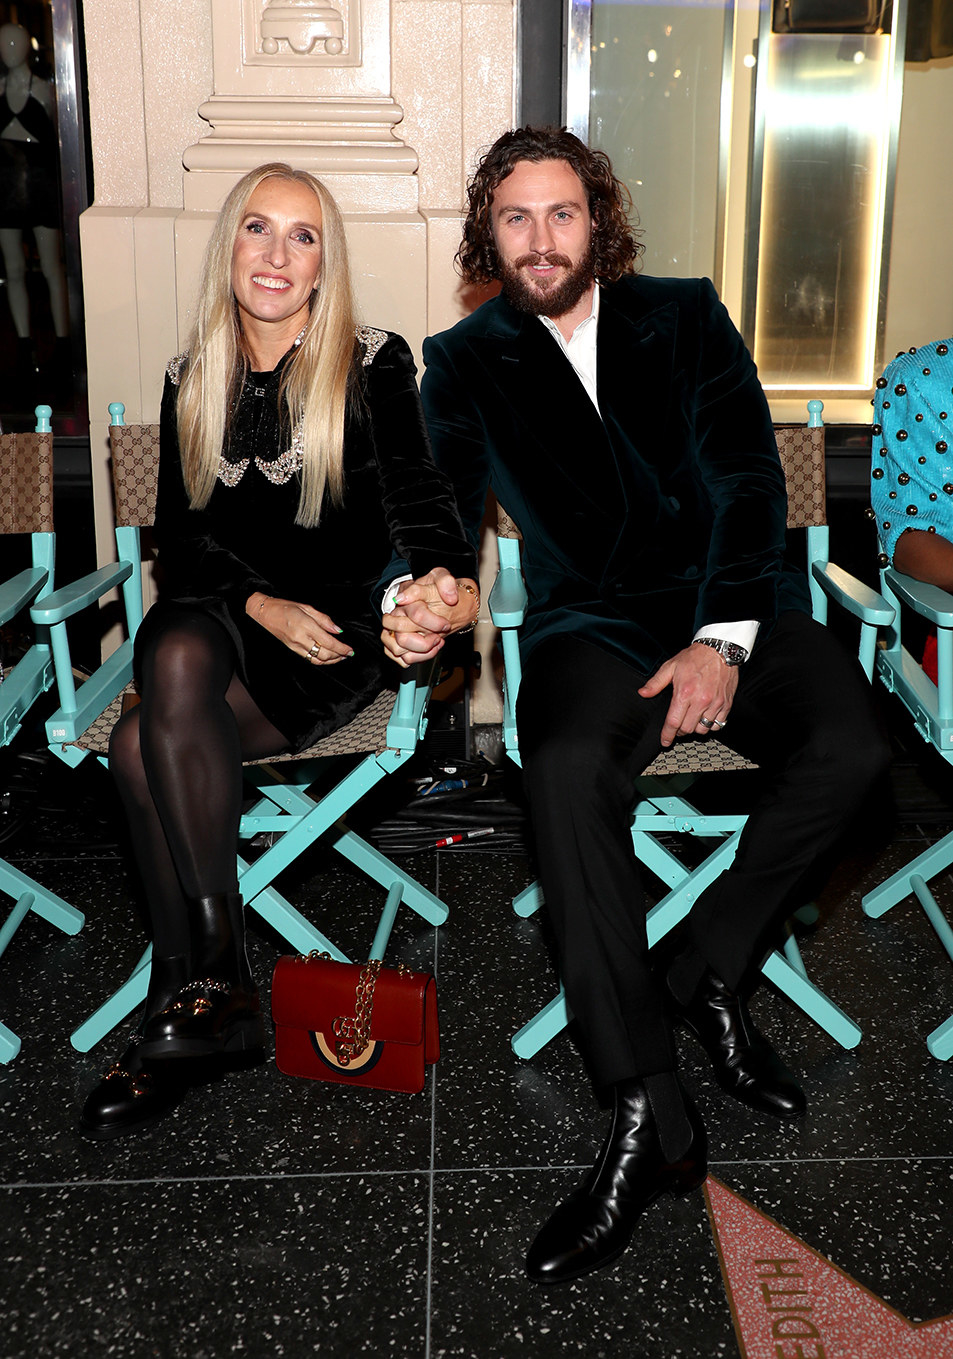 Sam and Aaron Taylor-Johnson at an event